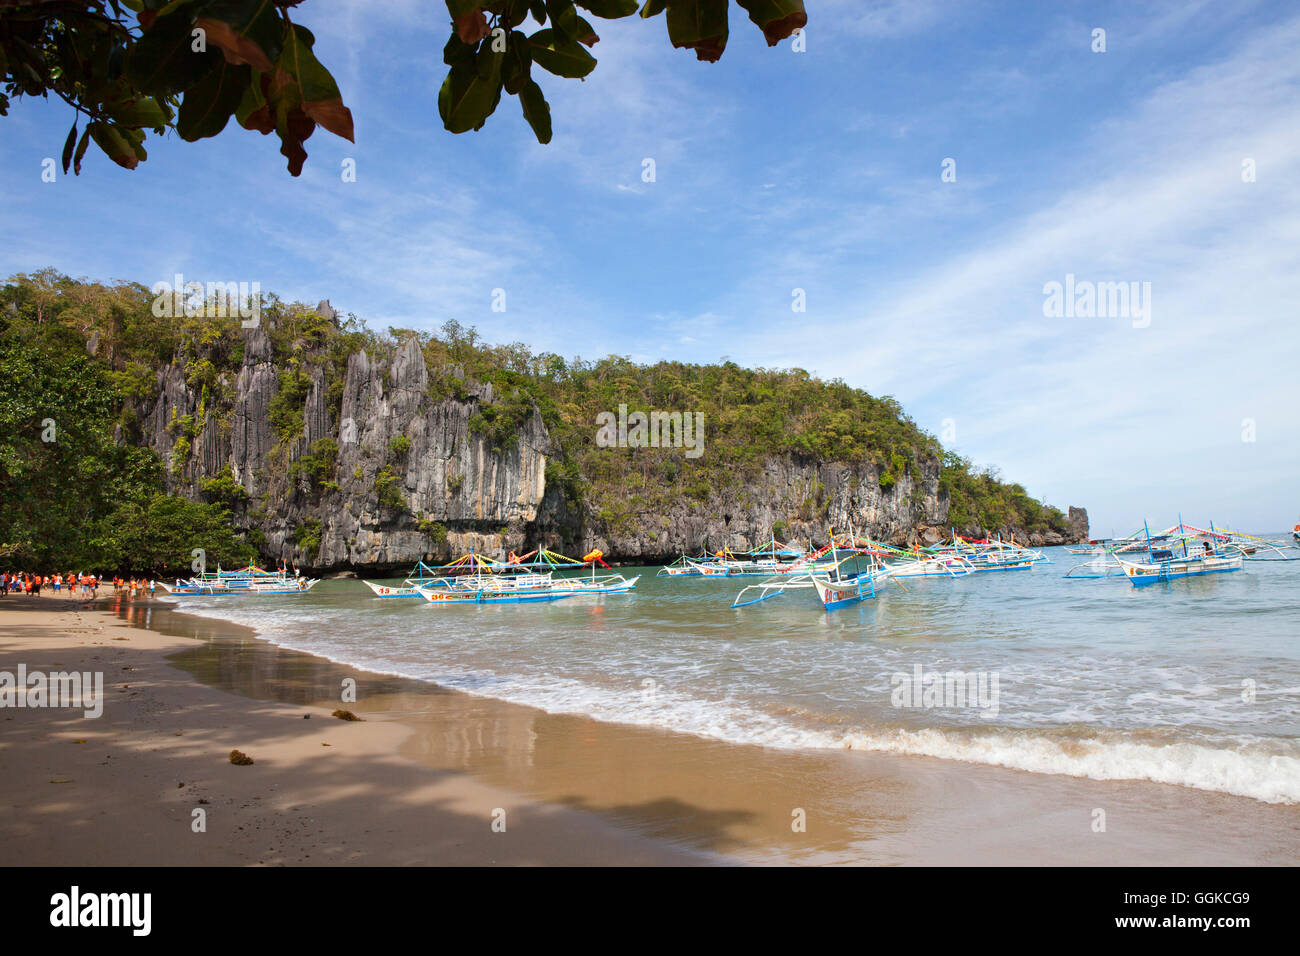 Excursion boats on the west coast of Palawan Island, Philippines, Asia Stock Photo